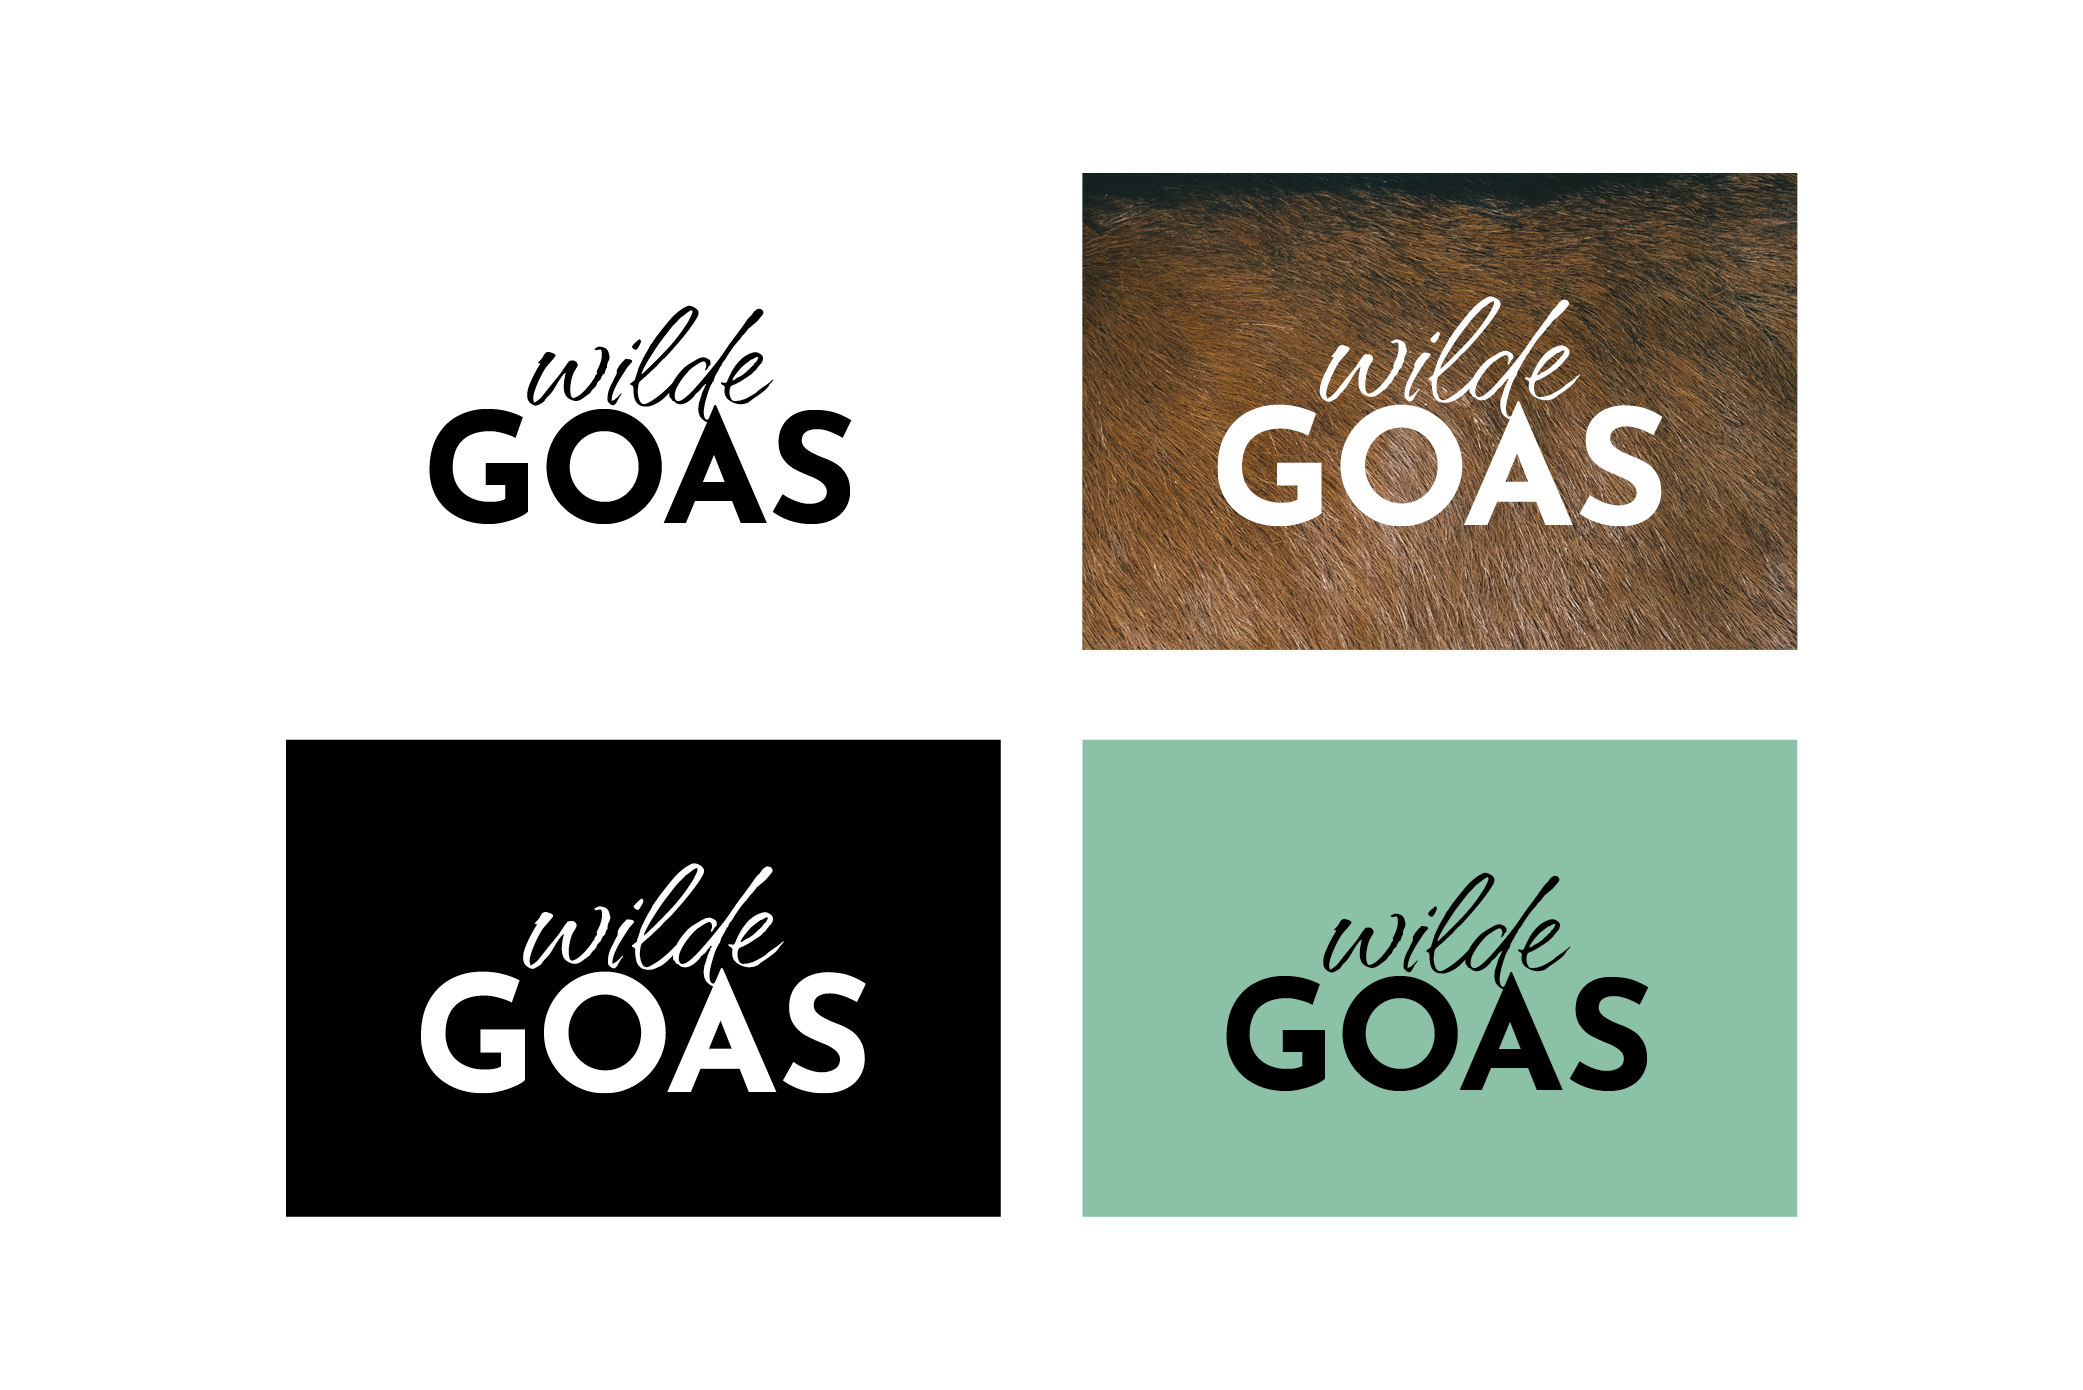 Logo Design For Wilde GOAS By Corliss. The Logo Is Tested On Different Kinds Of Backgrounds To Make Sure It Works No Matter What Background